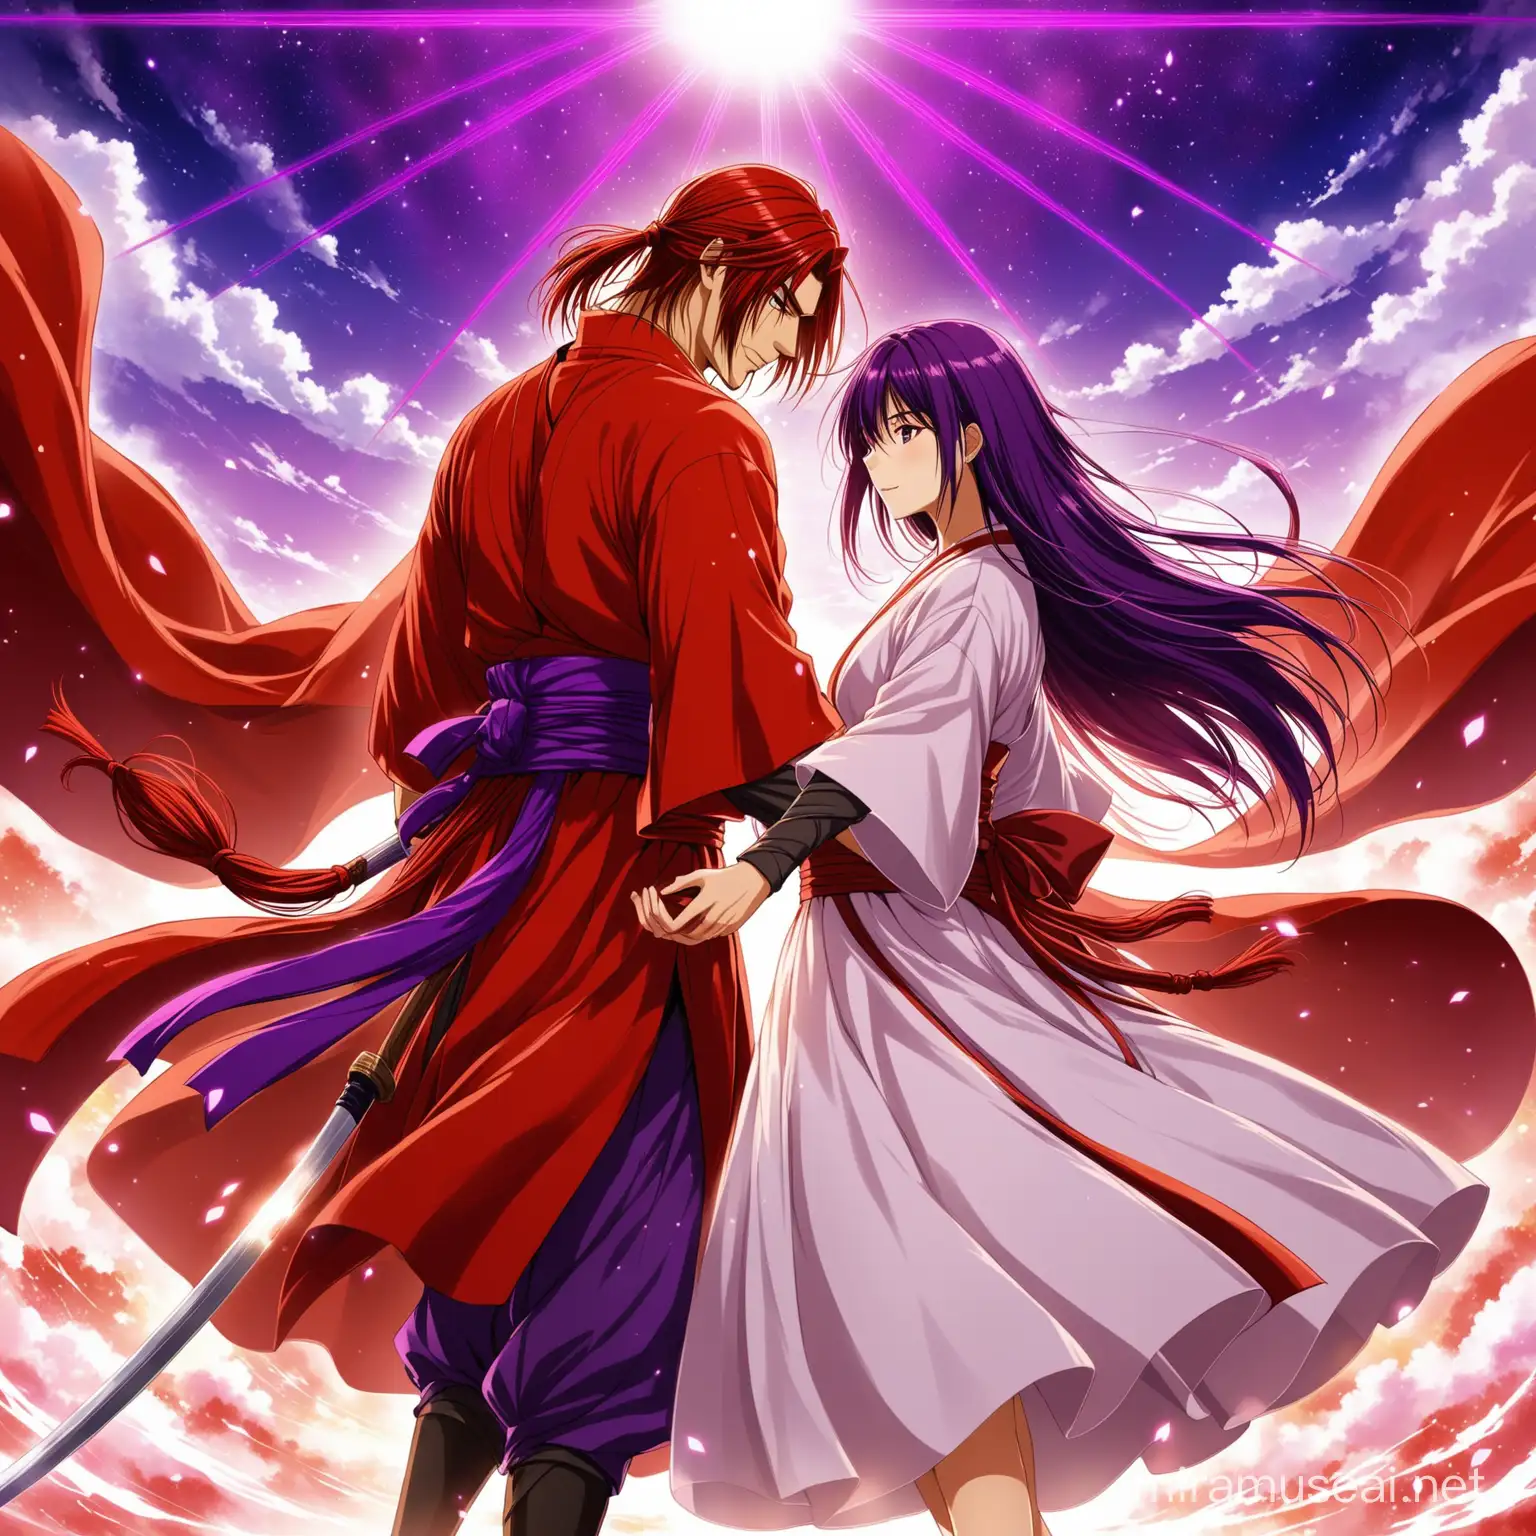 Rurouni Kenshin Power Couple Changing the World in Red and Purple